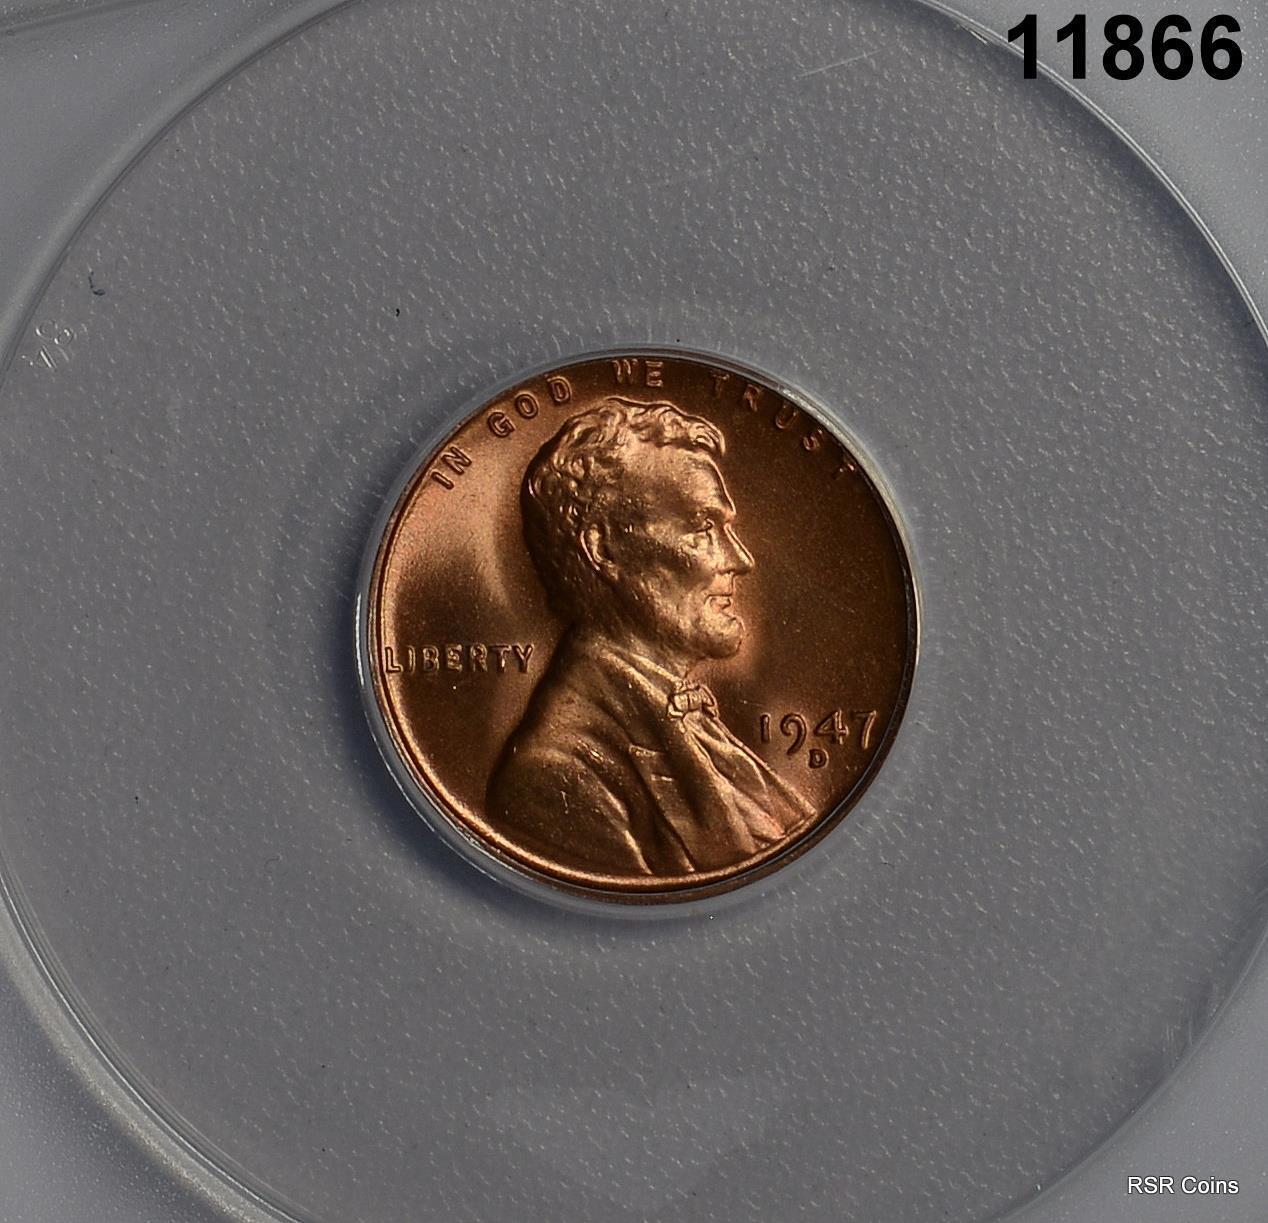 1947 D LINCOLN CENT ANACS CERTIFIED MS66 RD! FINE RED! #11866